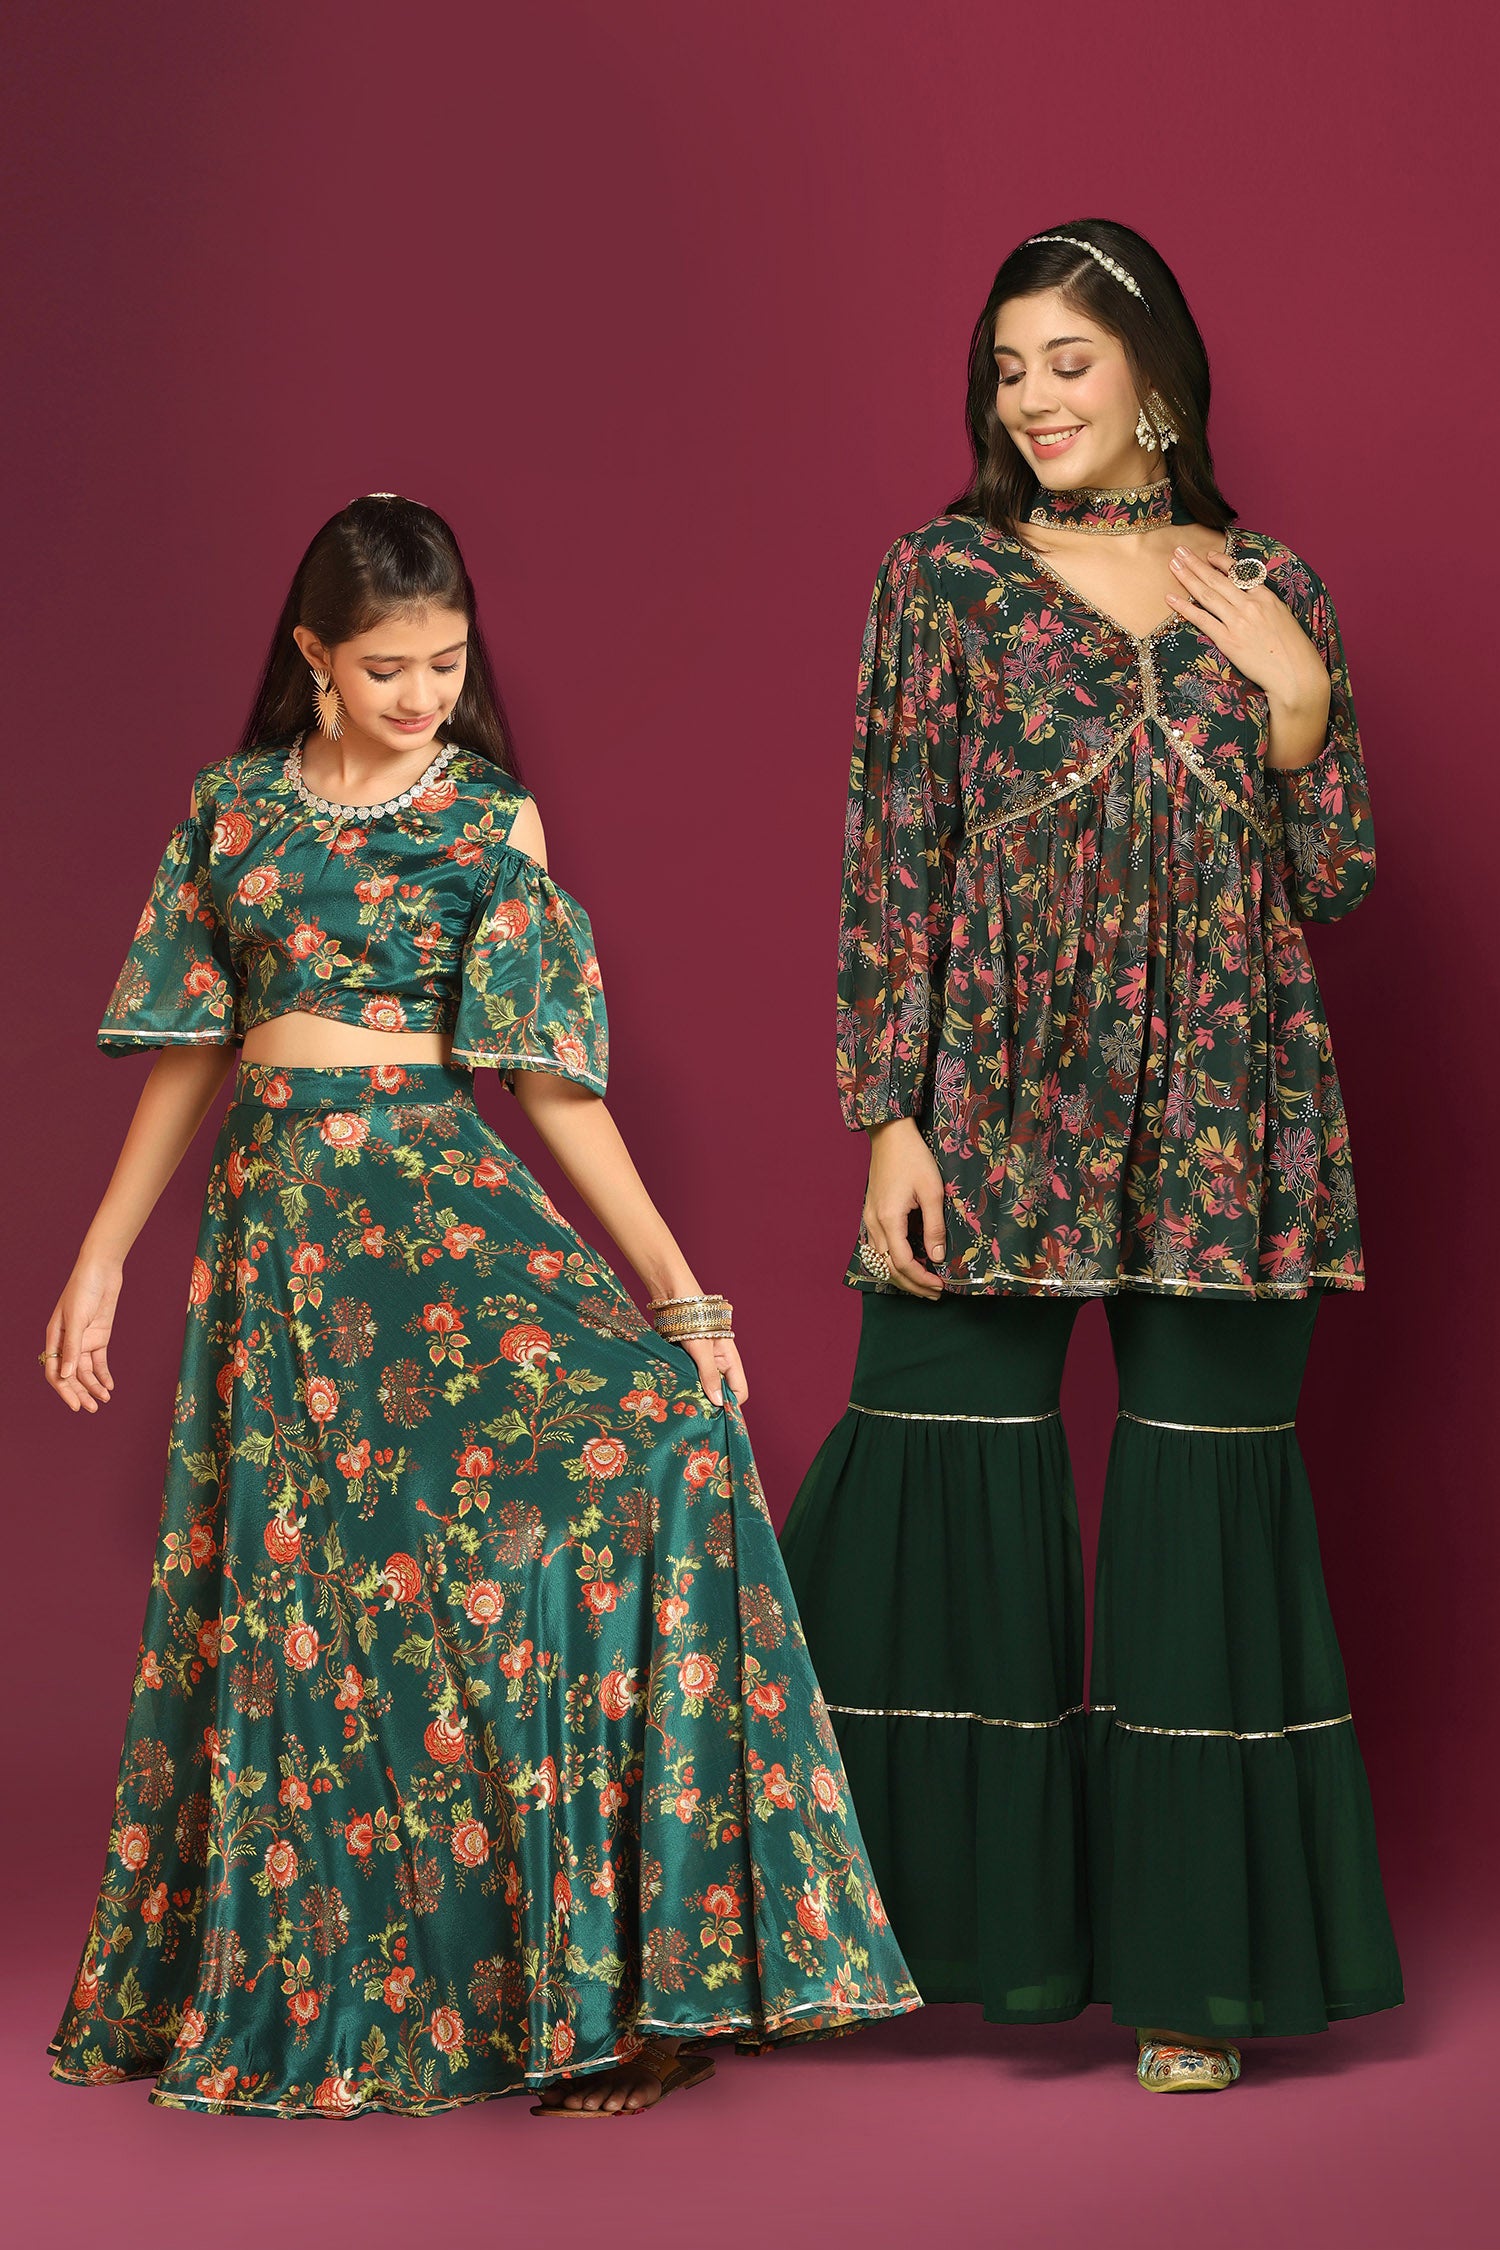 Myntra Myntra Mom Daughter Matching Dresses 2021 | Myntra Shipping Hual |  Outfit ideas - YouTube